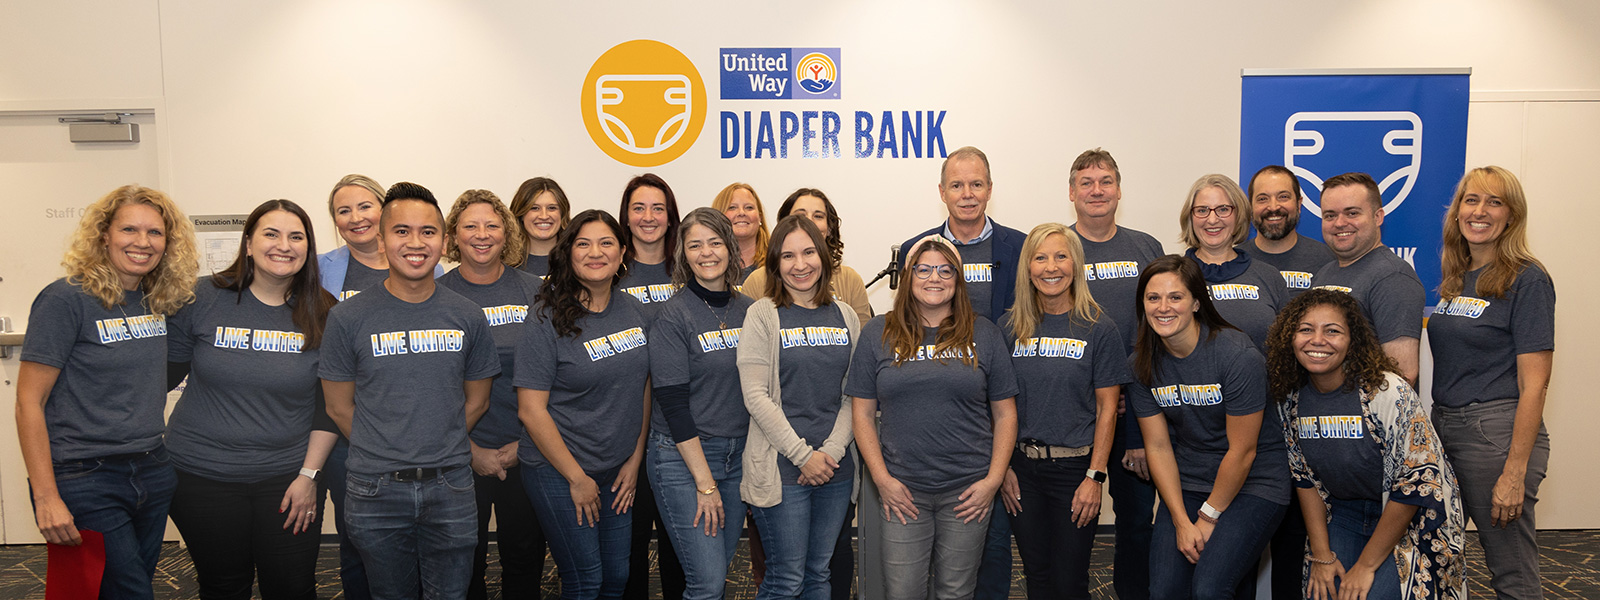 group of volunteer posing for photo by Diaper Bank sign